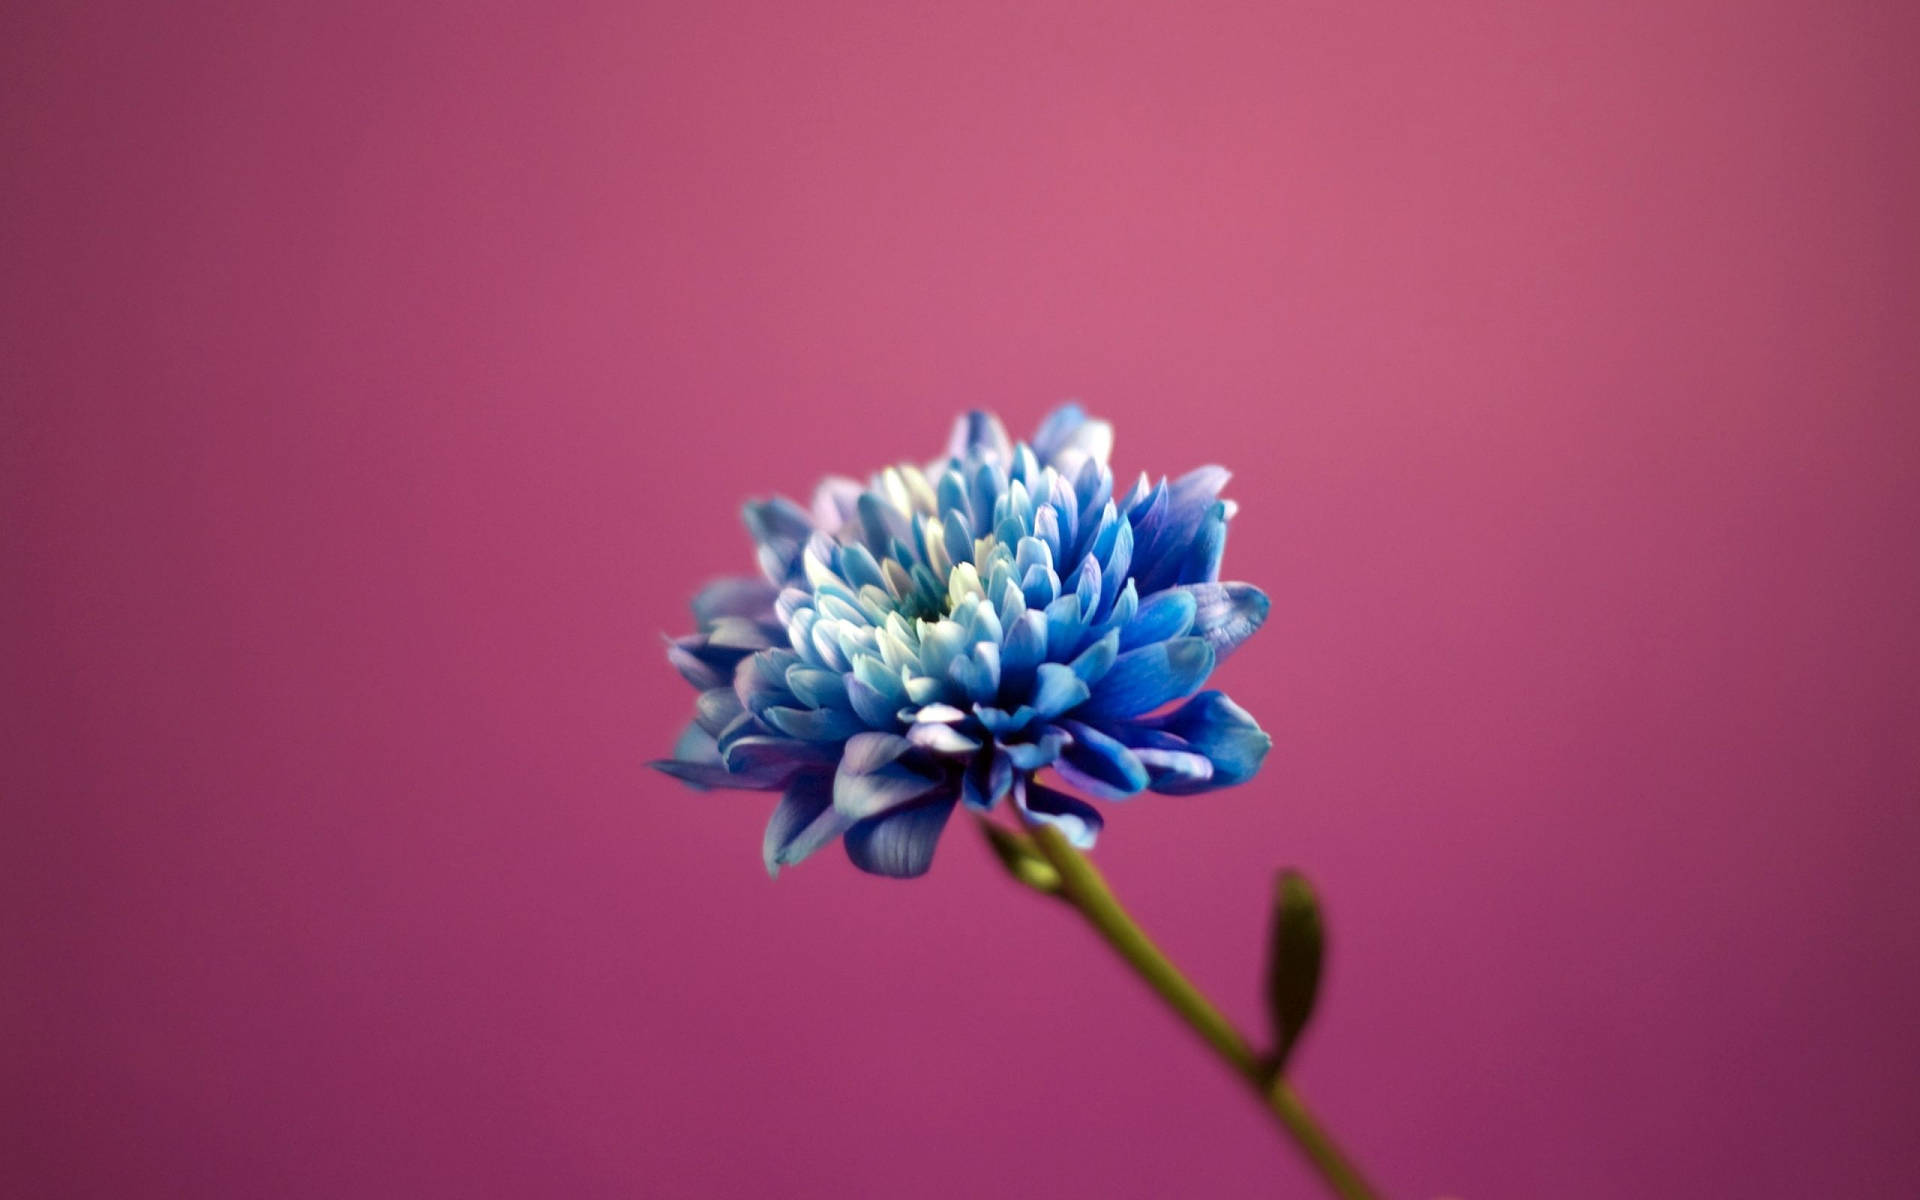 Macro Flower With Shades Of Blue Background